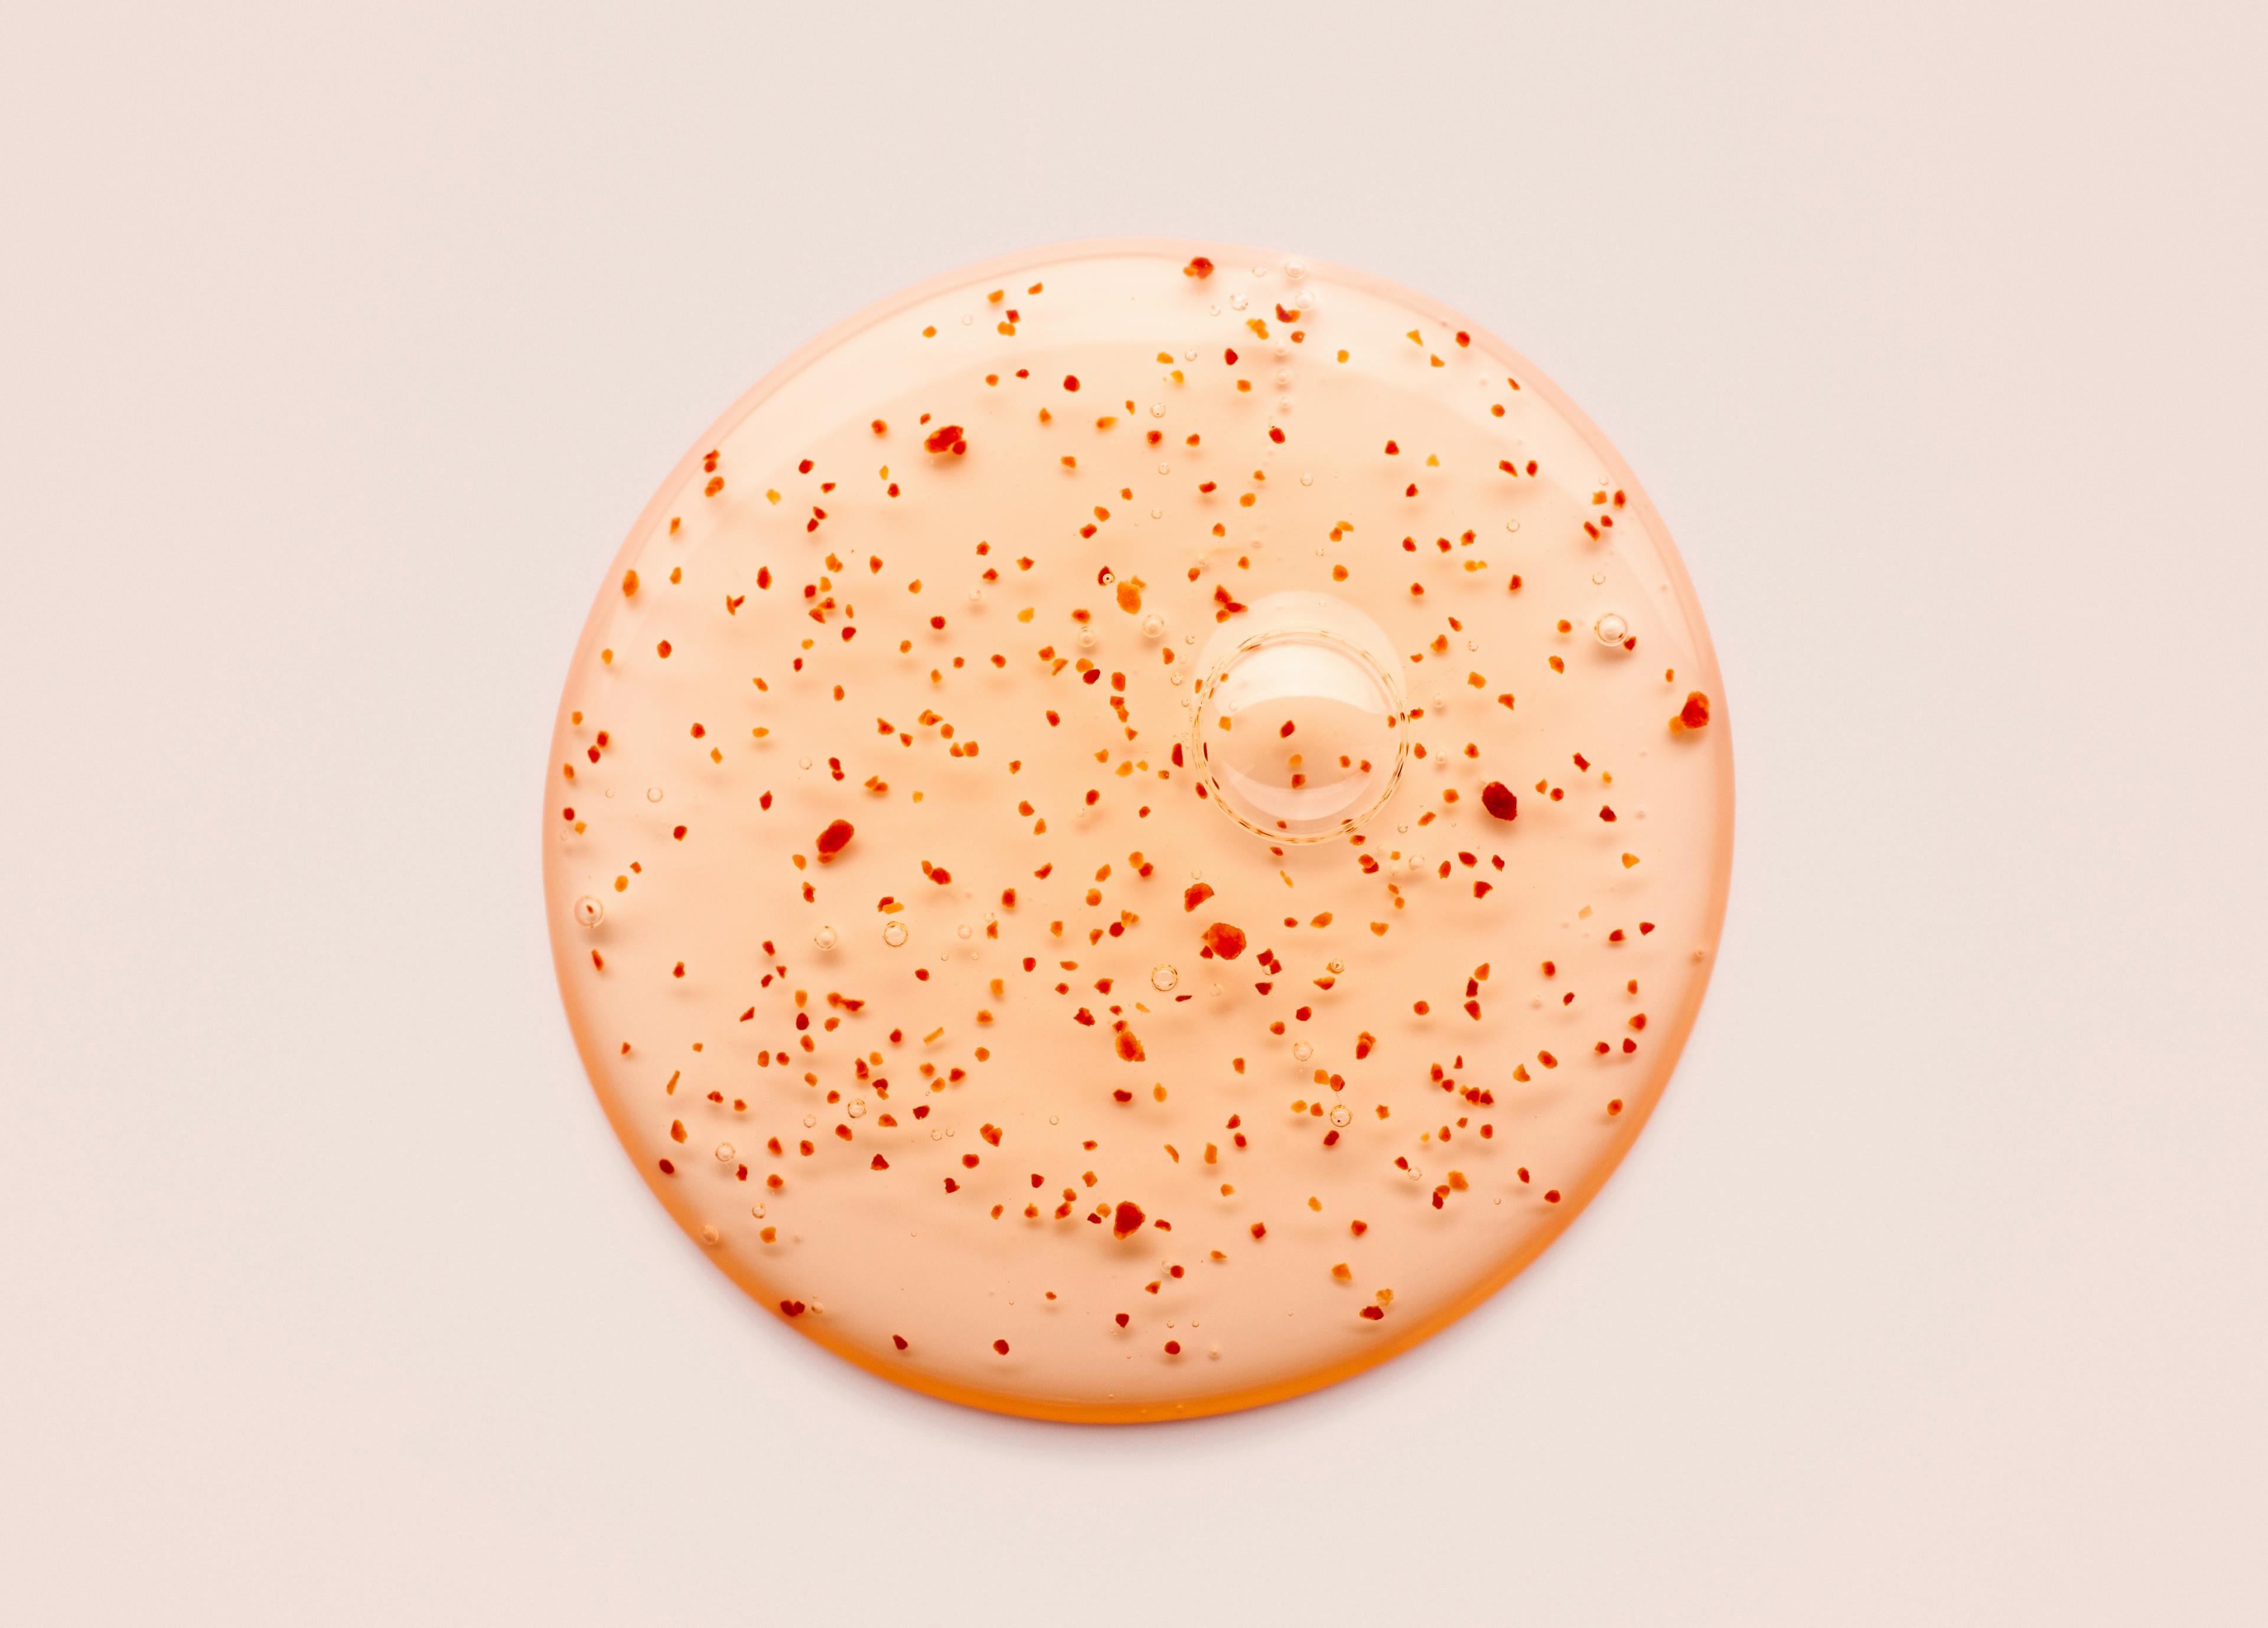 Light orange gel with red suspended particles on a pale pink background